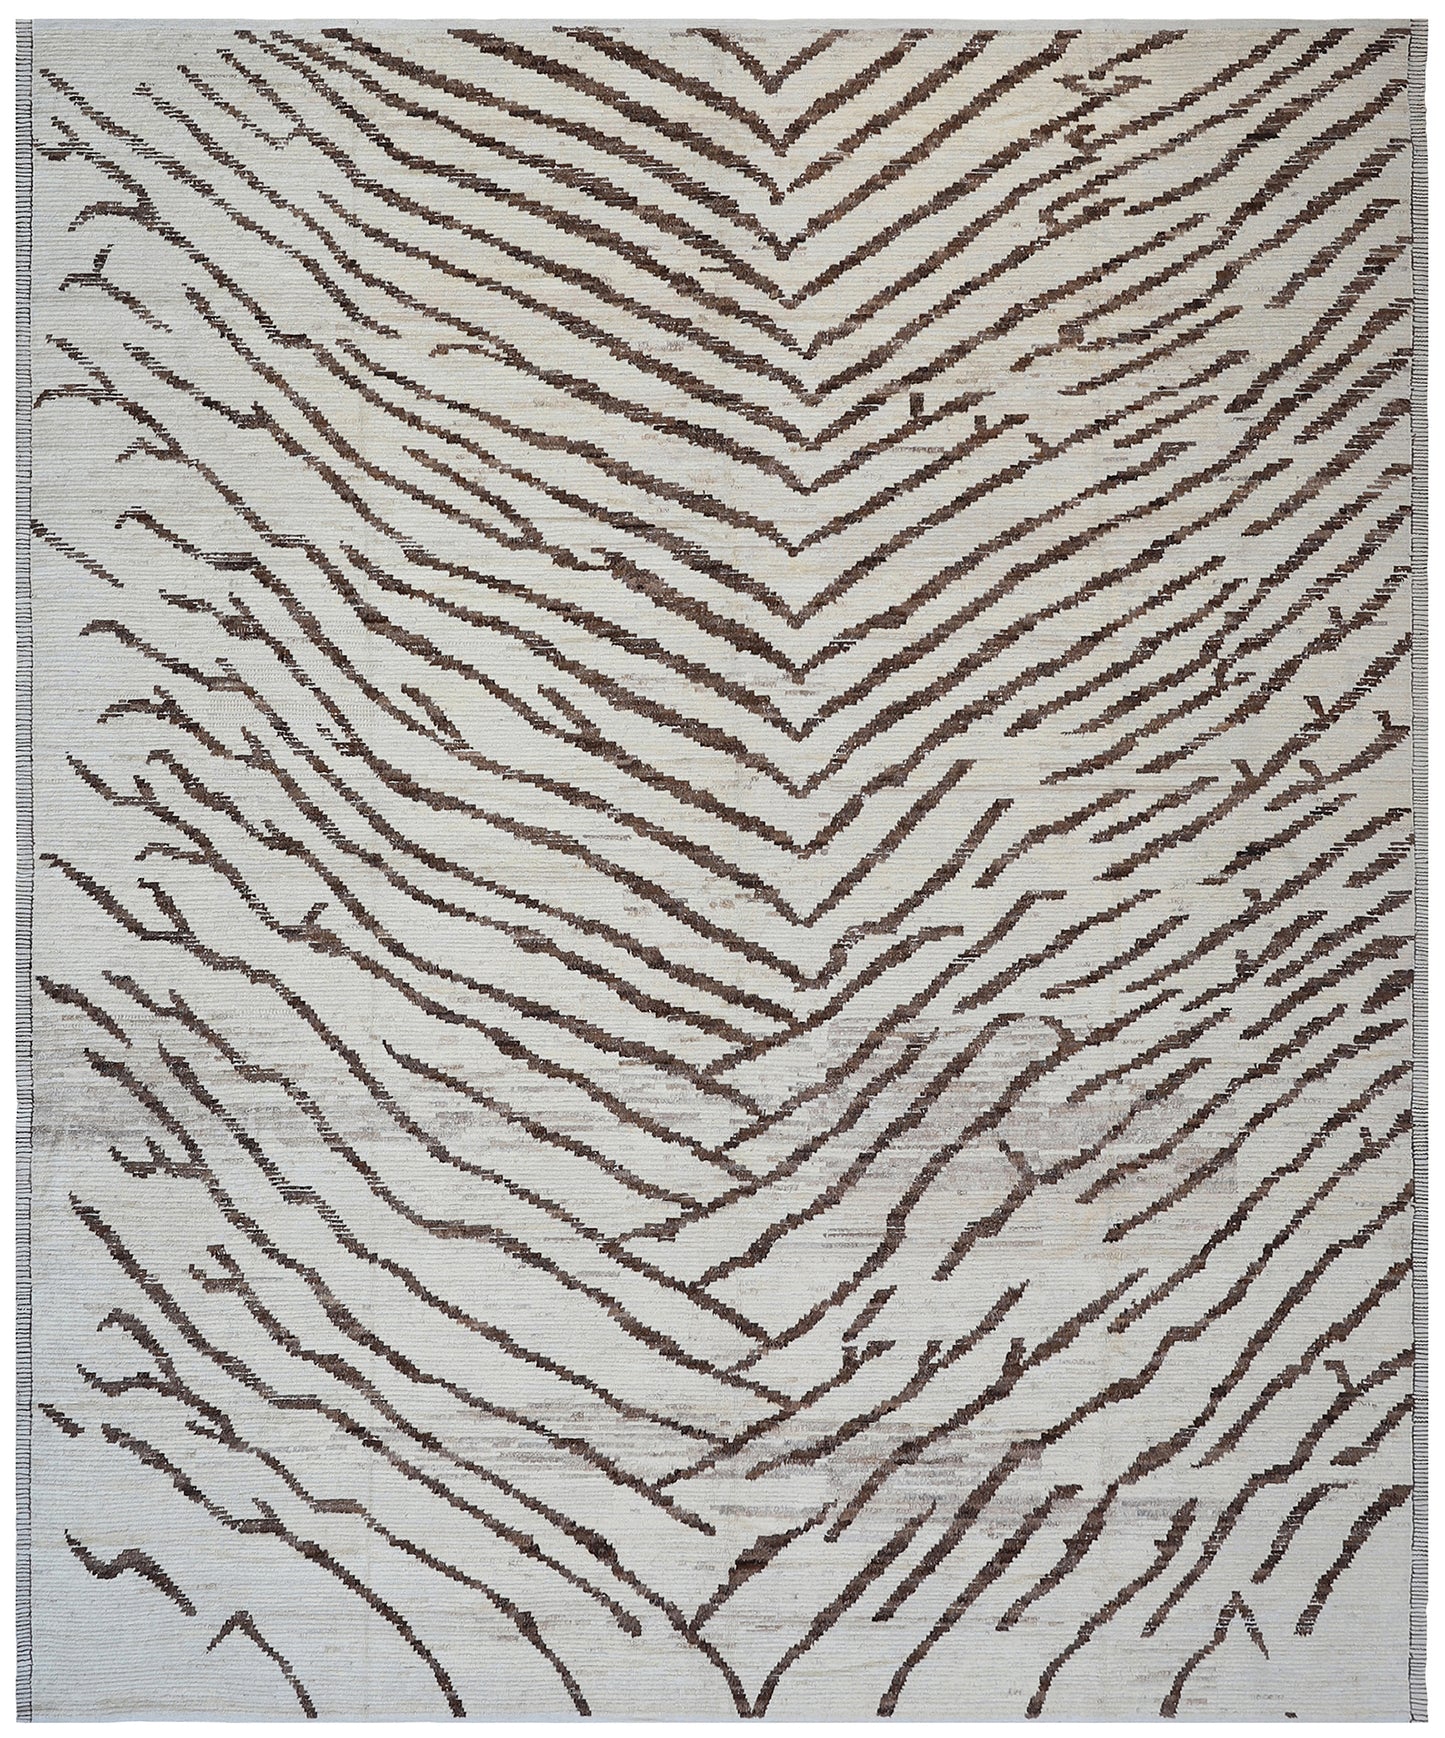 13'x16' Brown Ivory Zebra Design Shaggy Moroccan Style Ariana Barchi Collection Rug